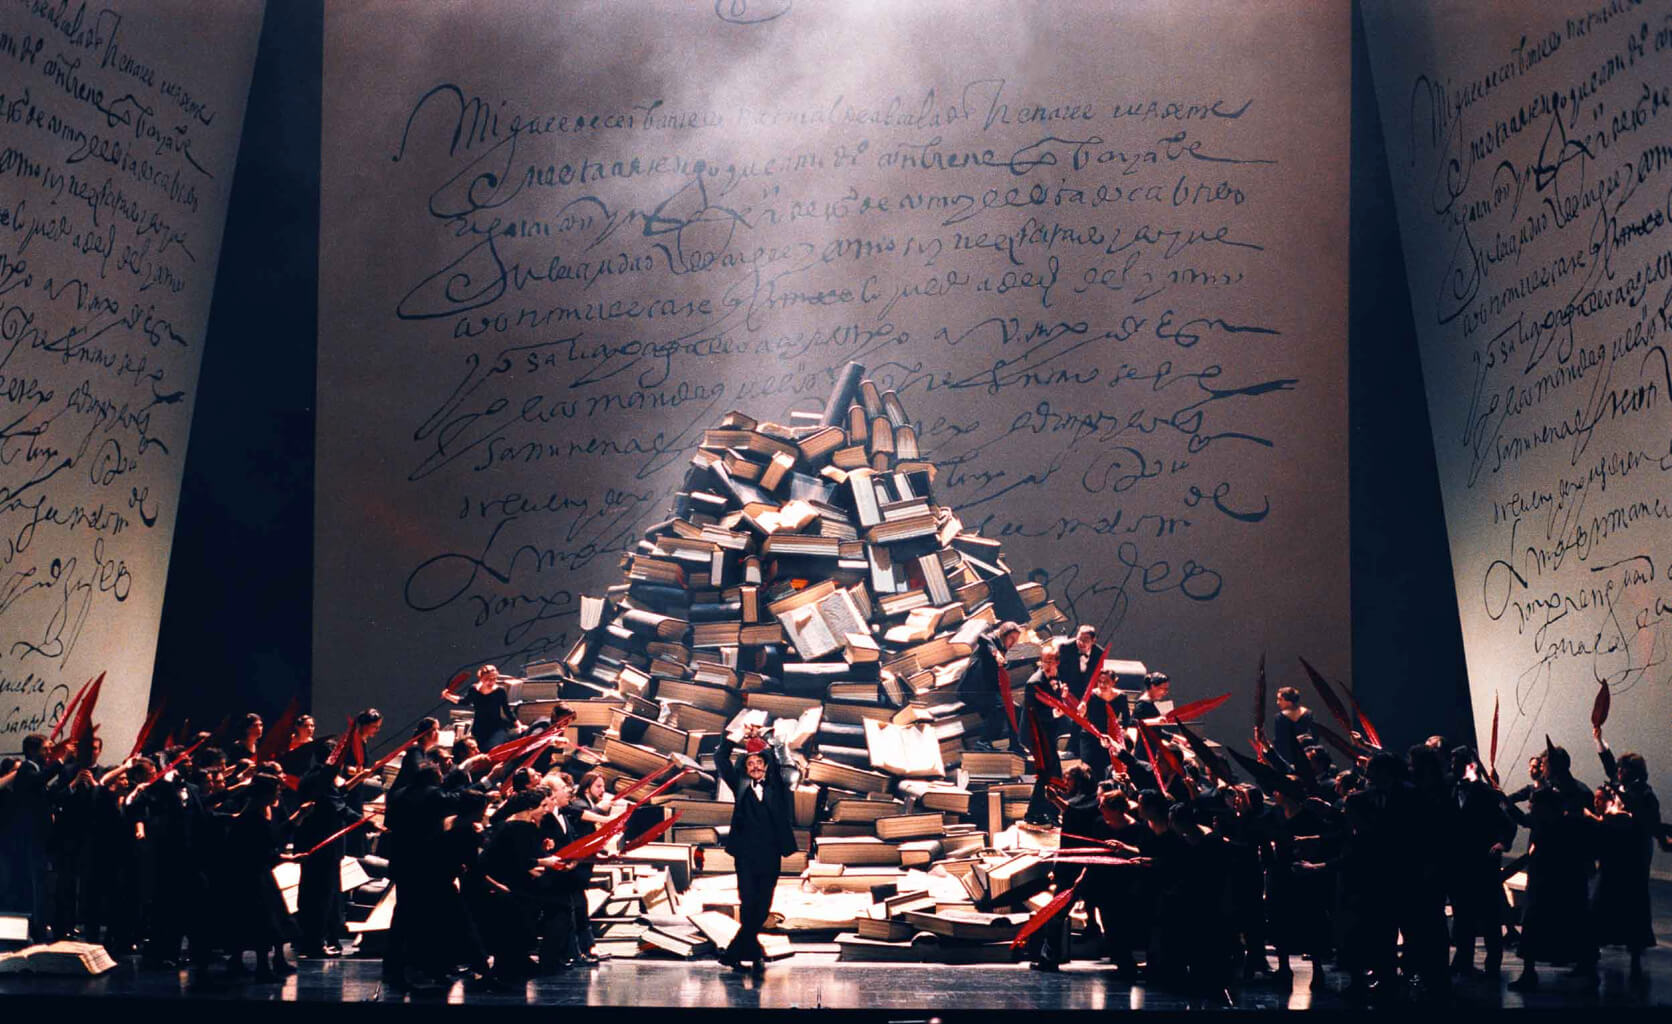 Scene of the representation of Don Quixote, an opera with music by Cristóbal Halffter and libretto by Andrés Amorós, performed in 2000.